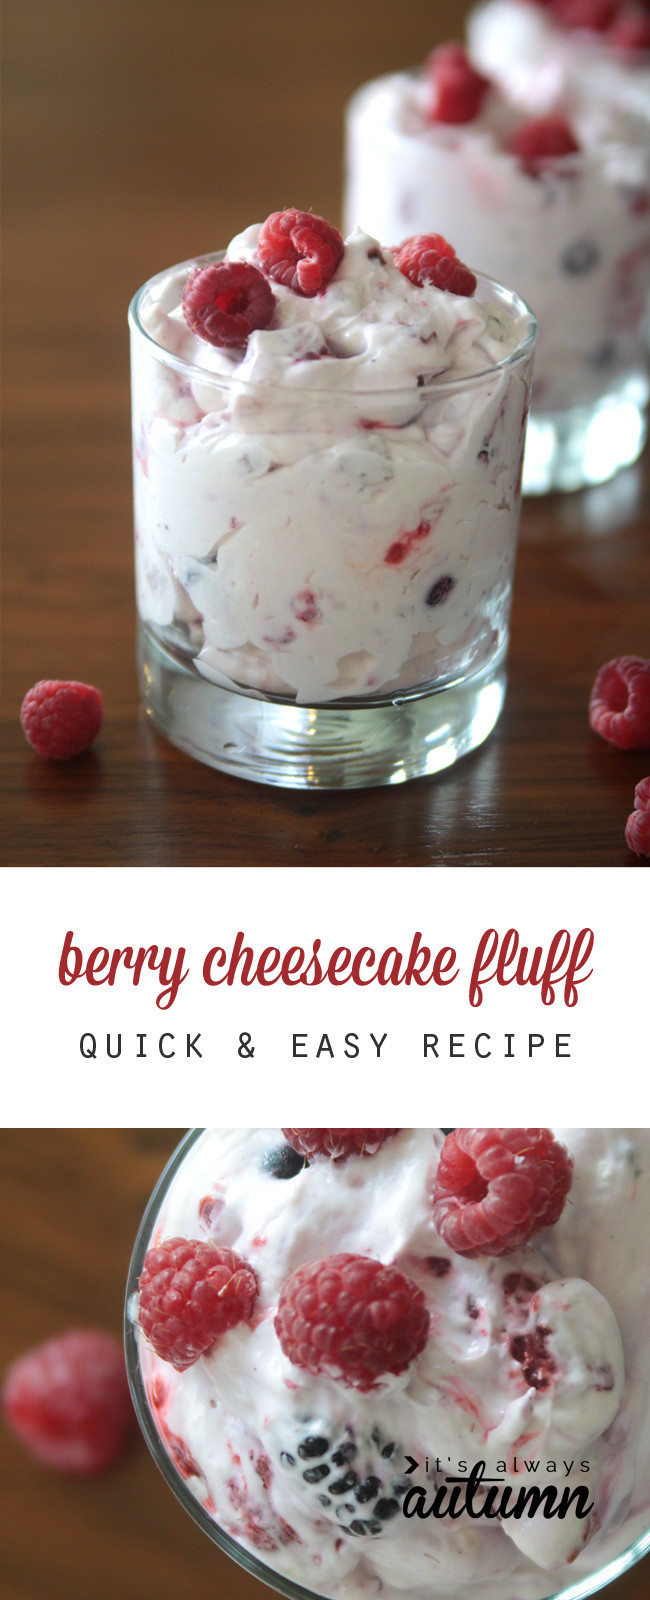 Simple Holiday Desserts
 berry cheesecake fluff a lighter holiday dessert It s